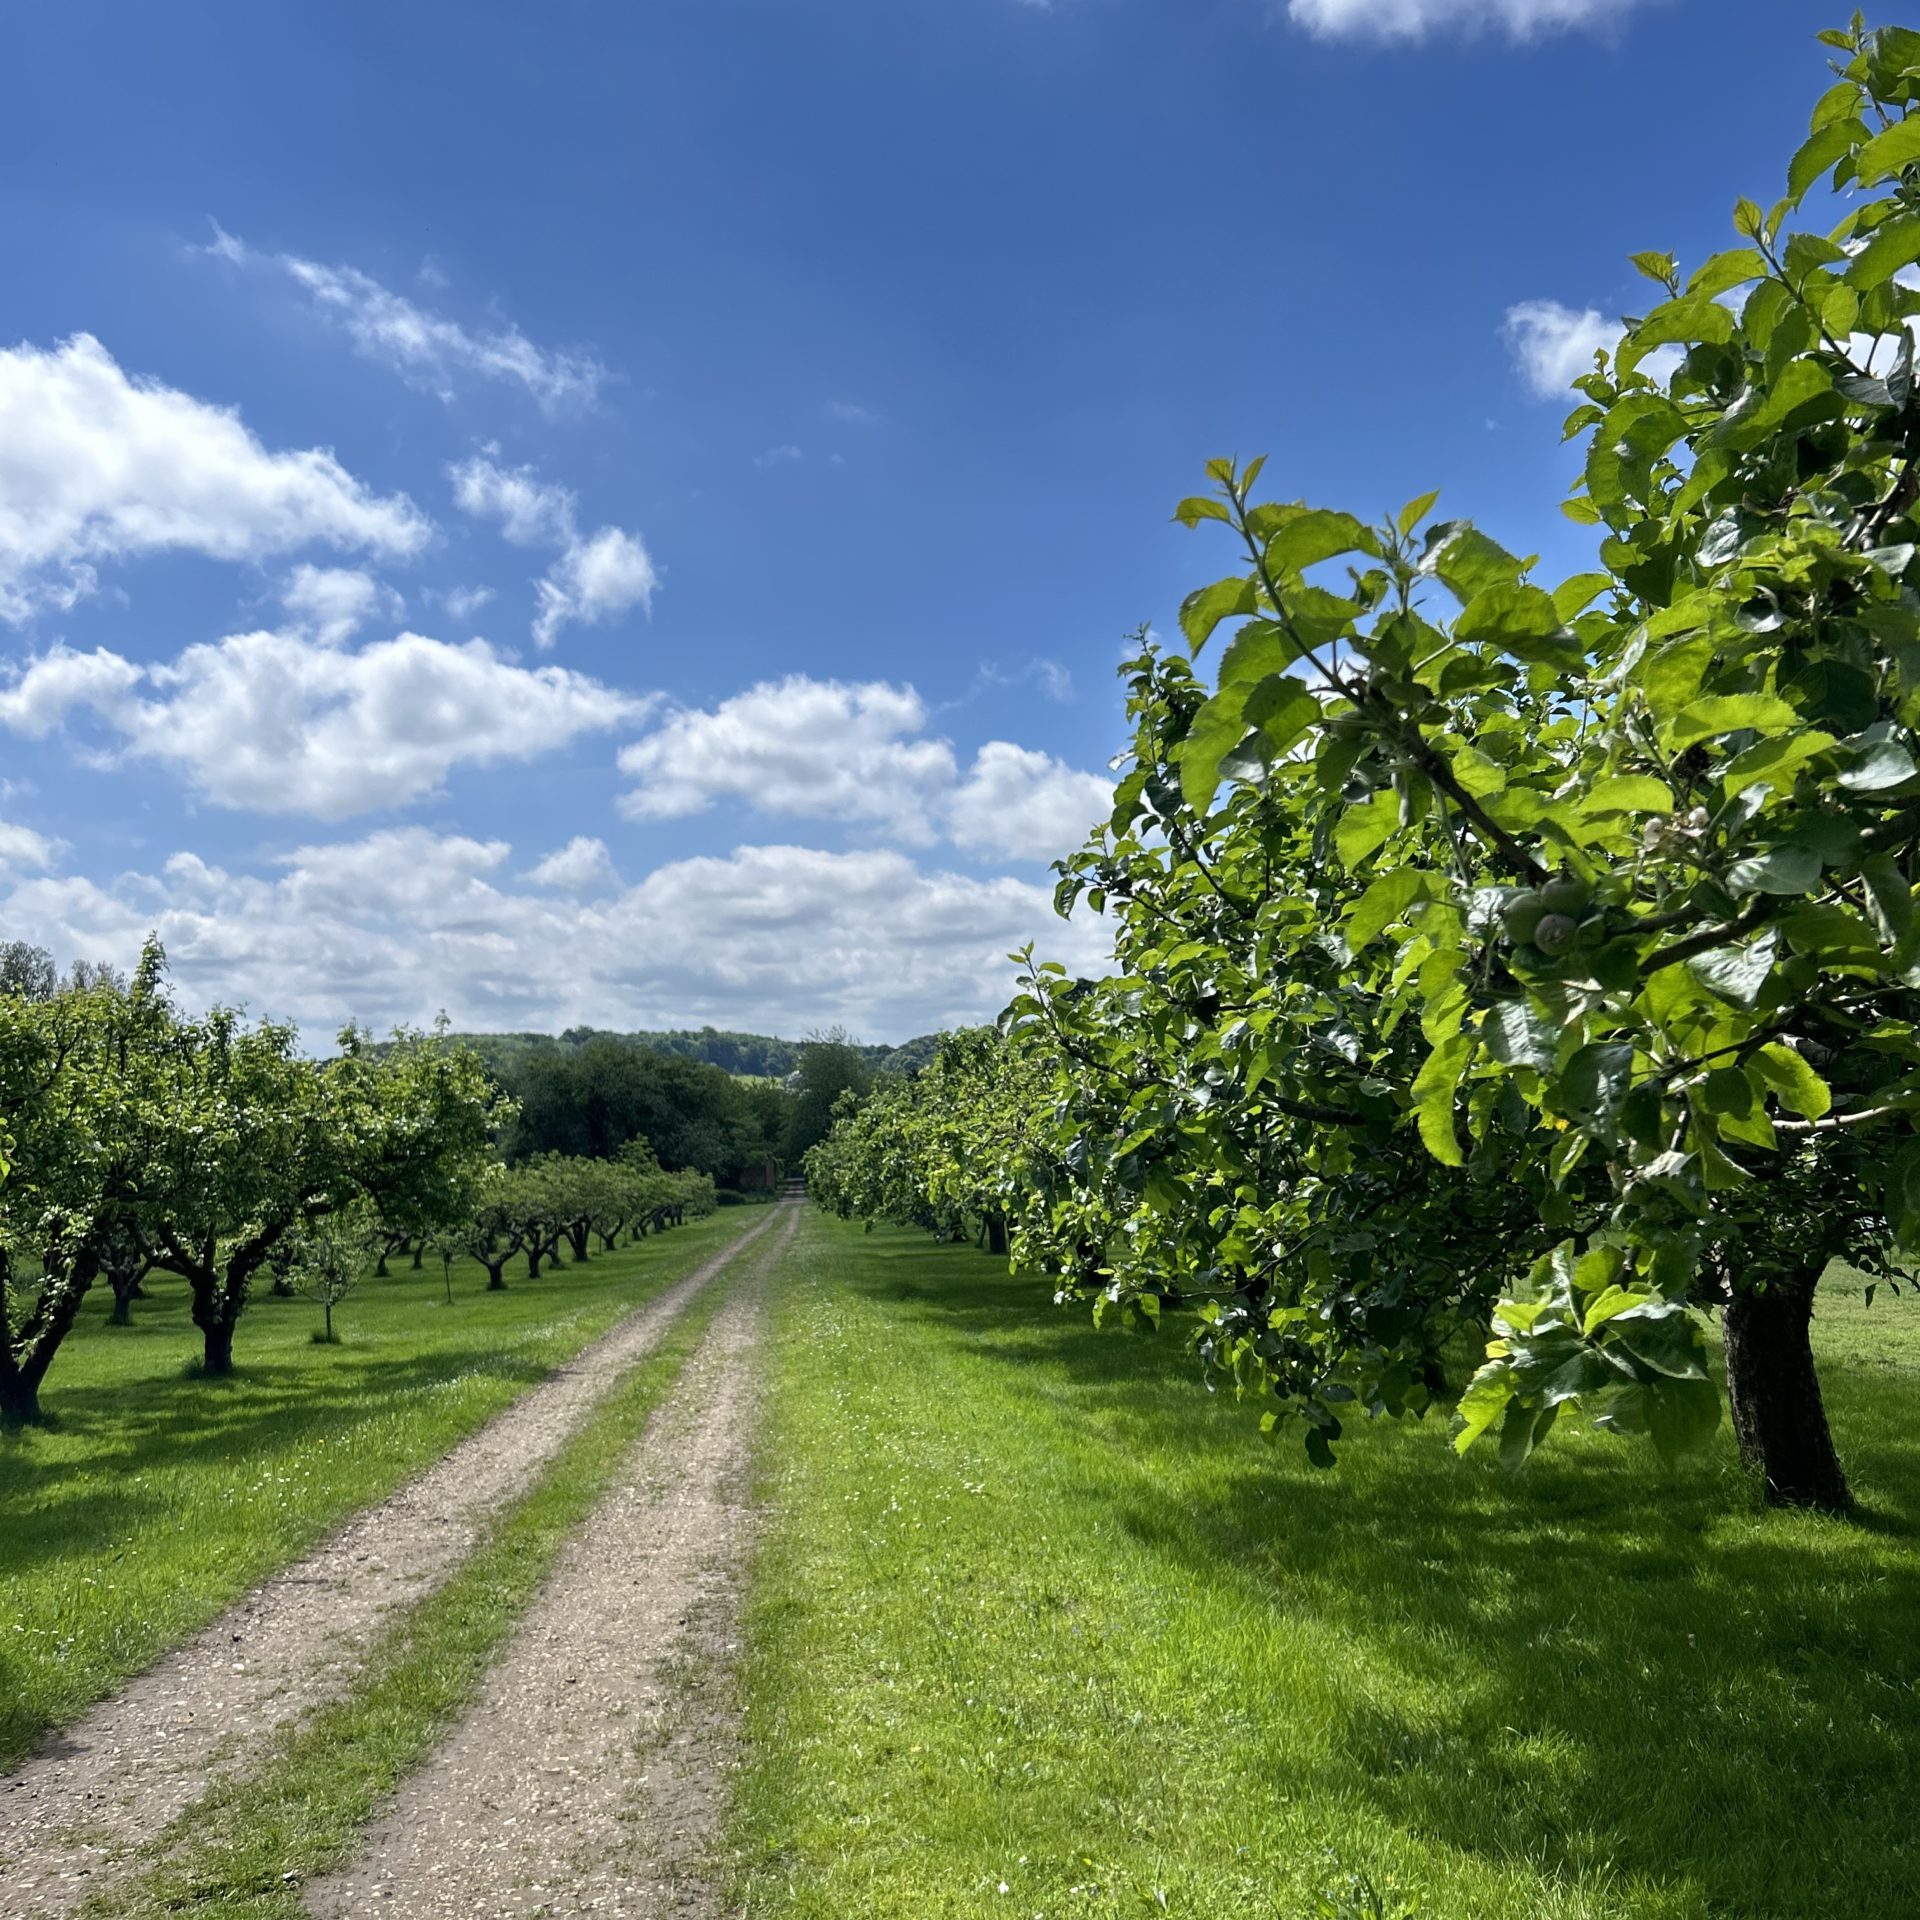 Image of the driveway and apple trees at Mereworth market garden